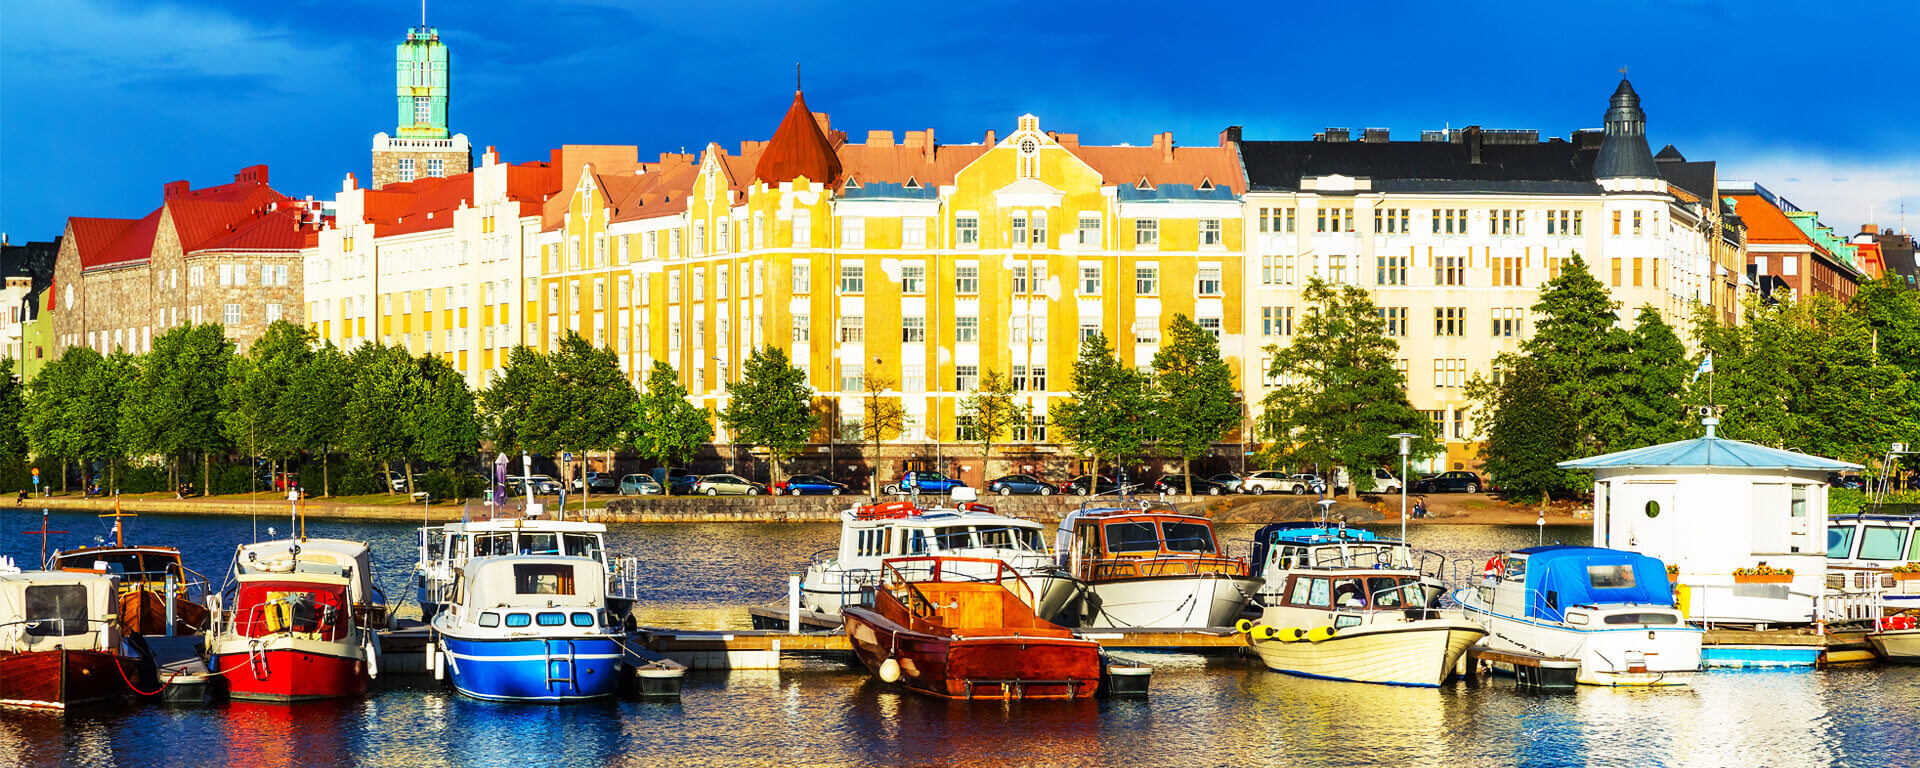 Finland Tour Packages